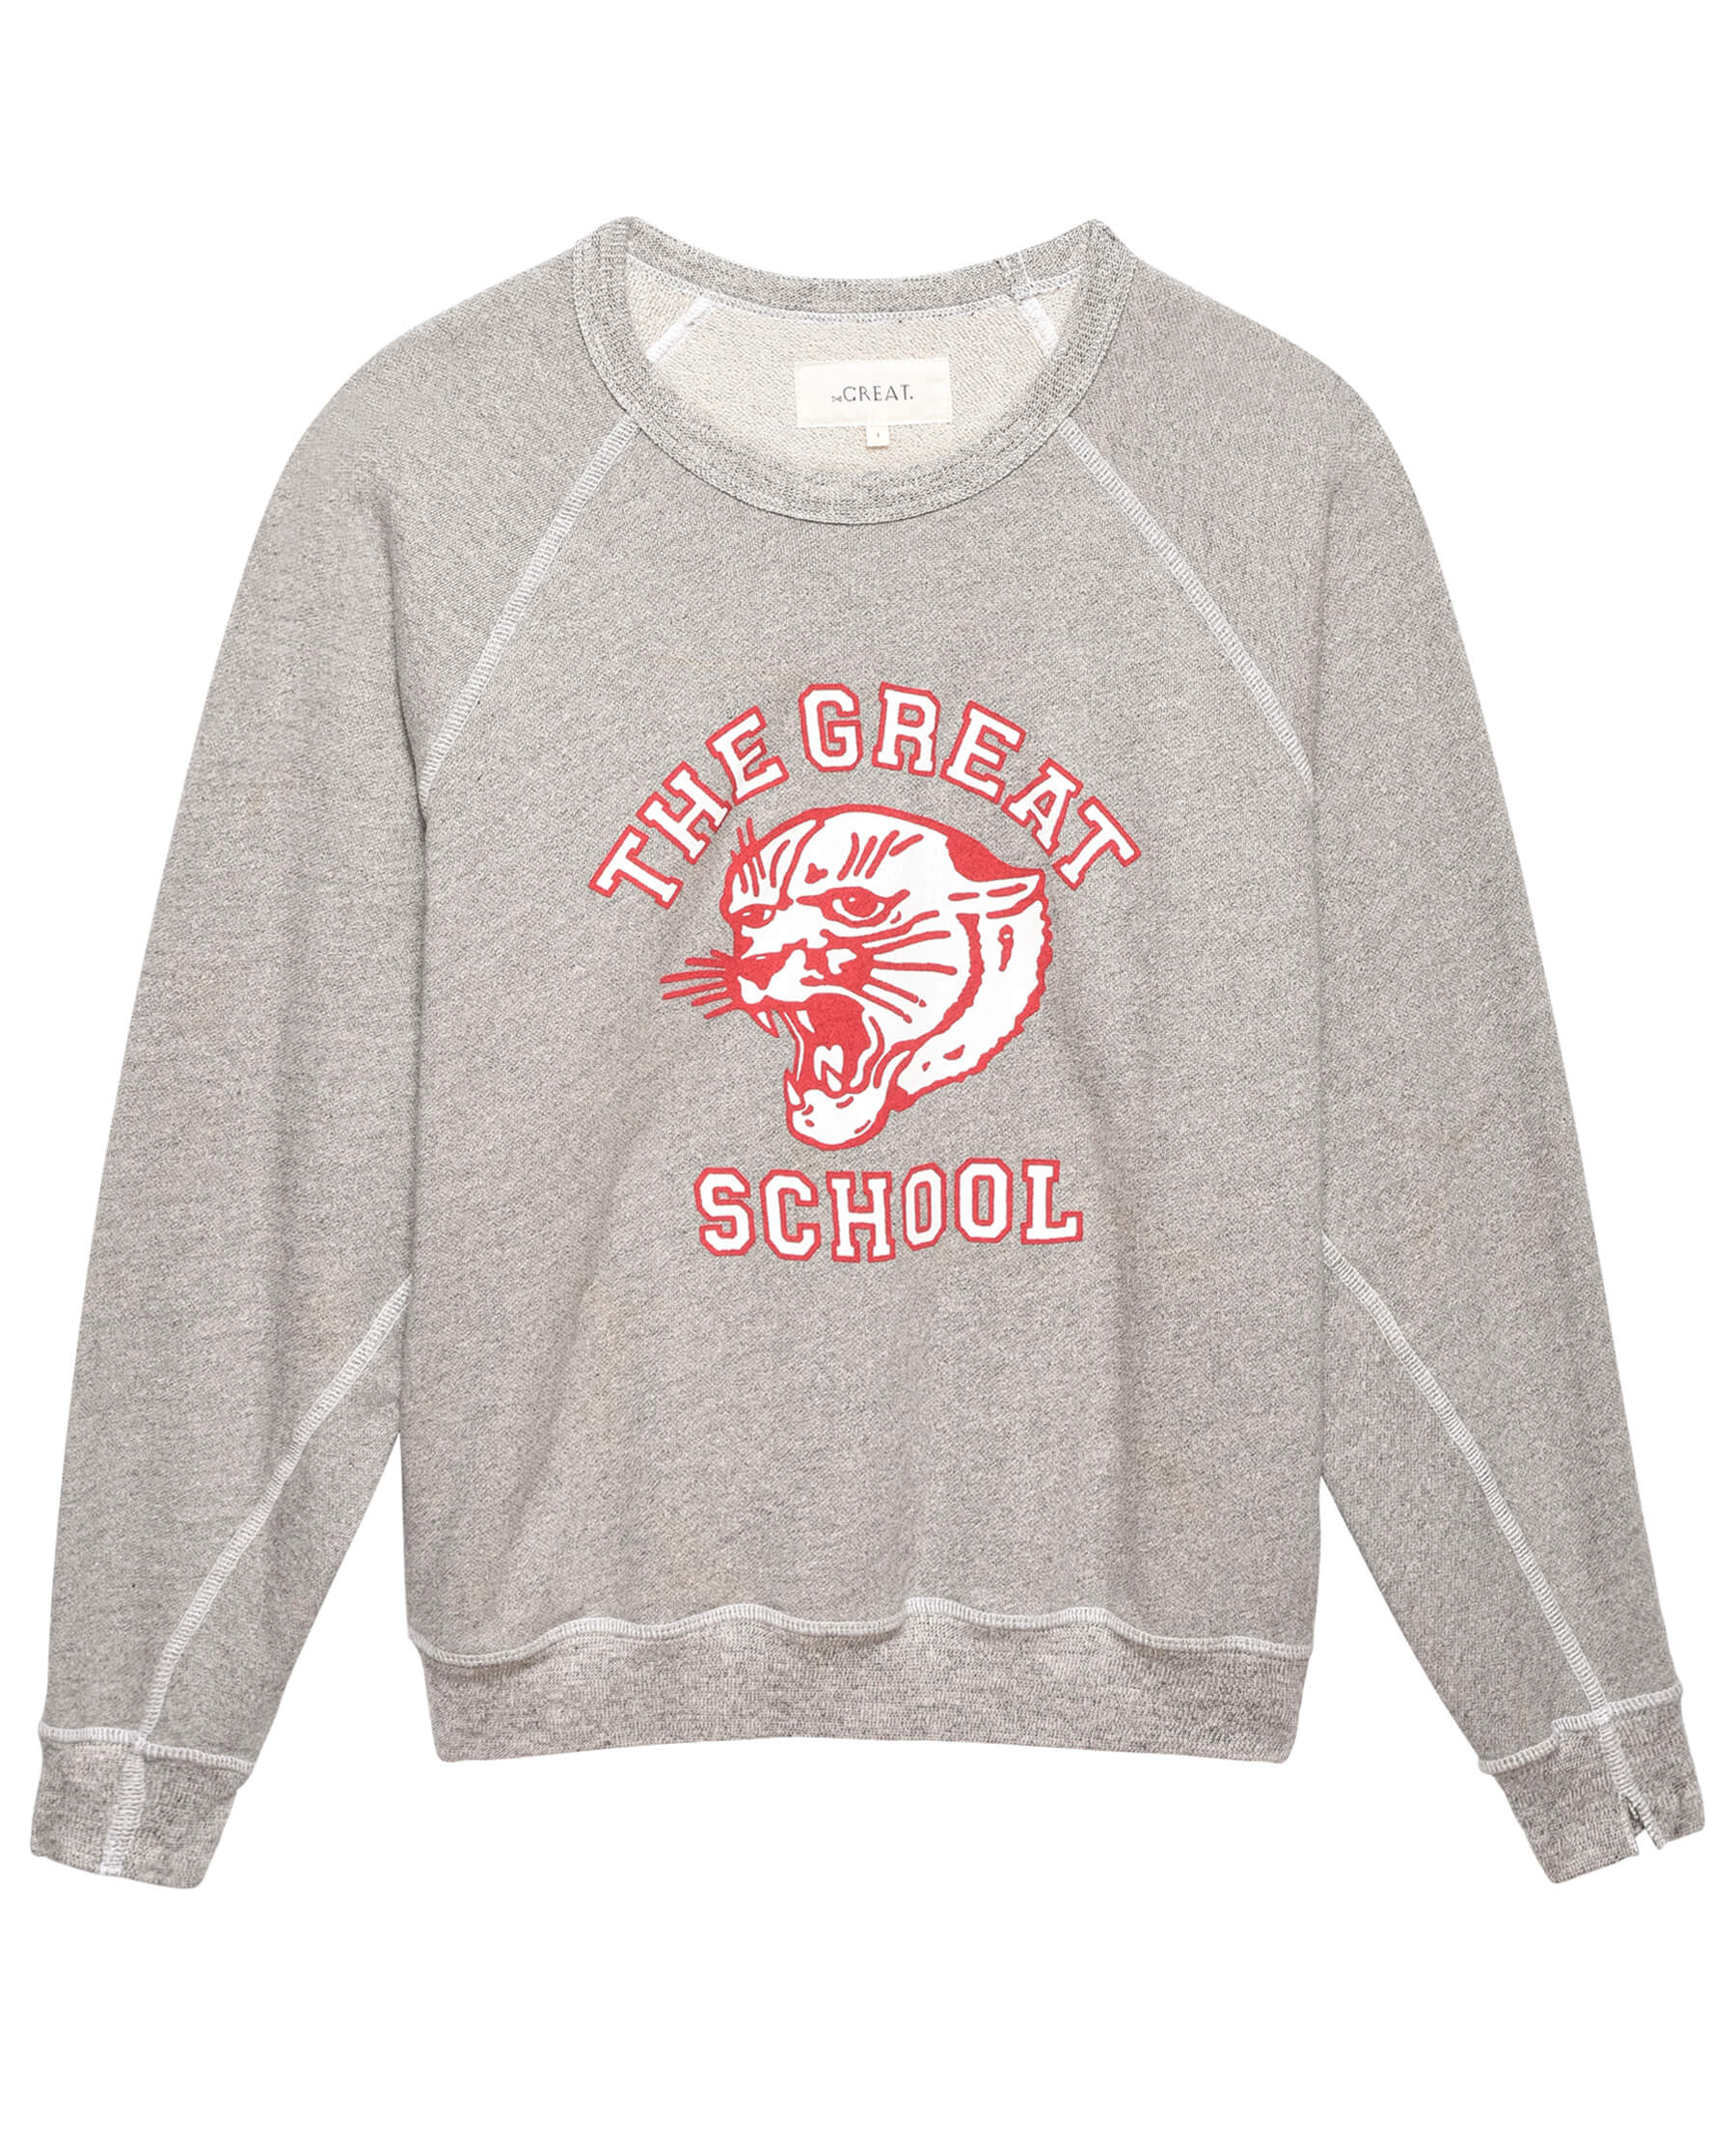 The College Sweatshirt. Graphic -- Varsity Grey with Bobcat Graphic SWEATSHIRTS THE GREAT. PS24 SALE